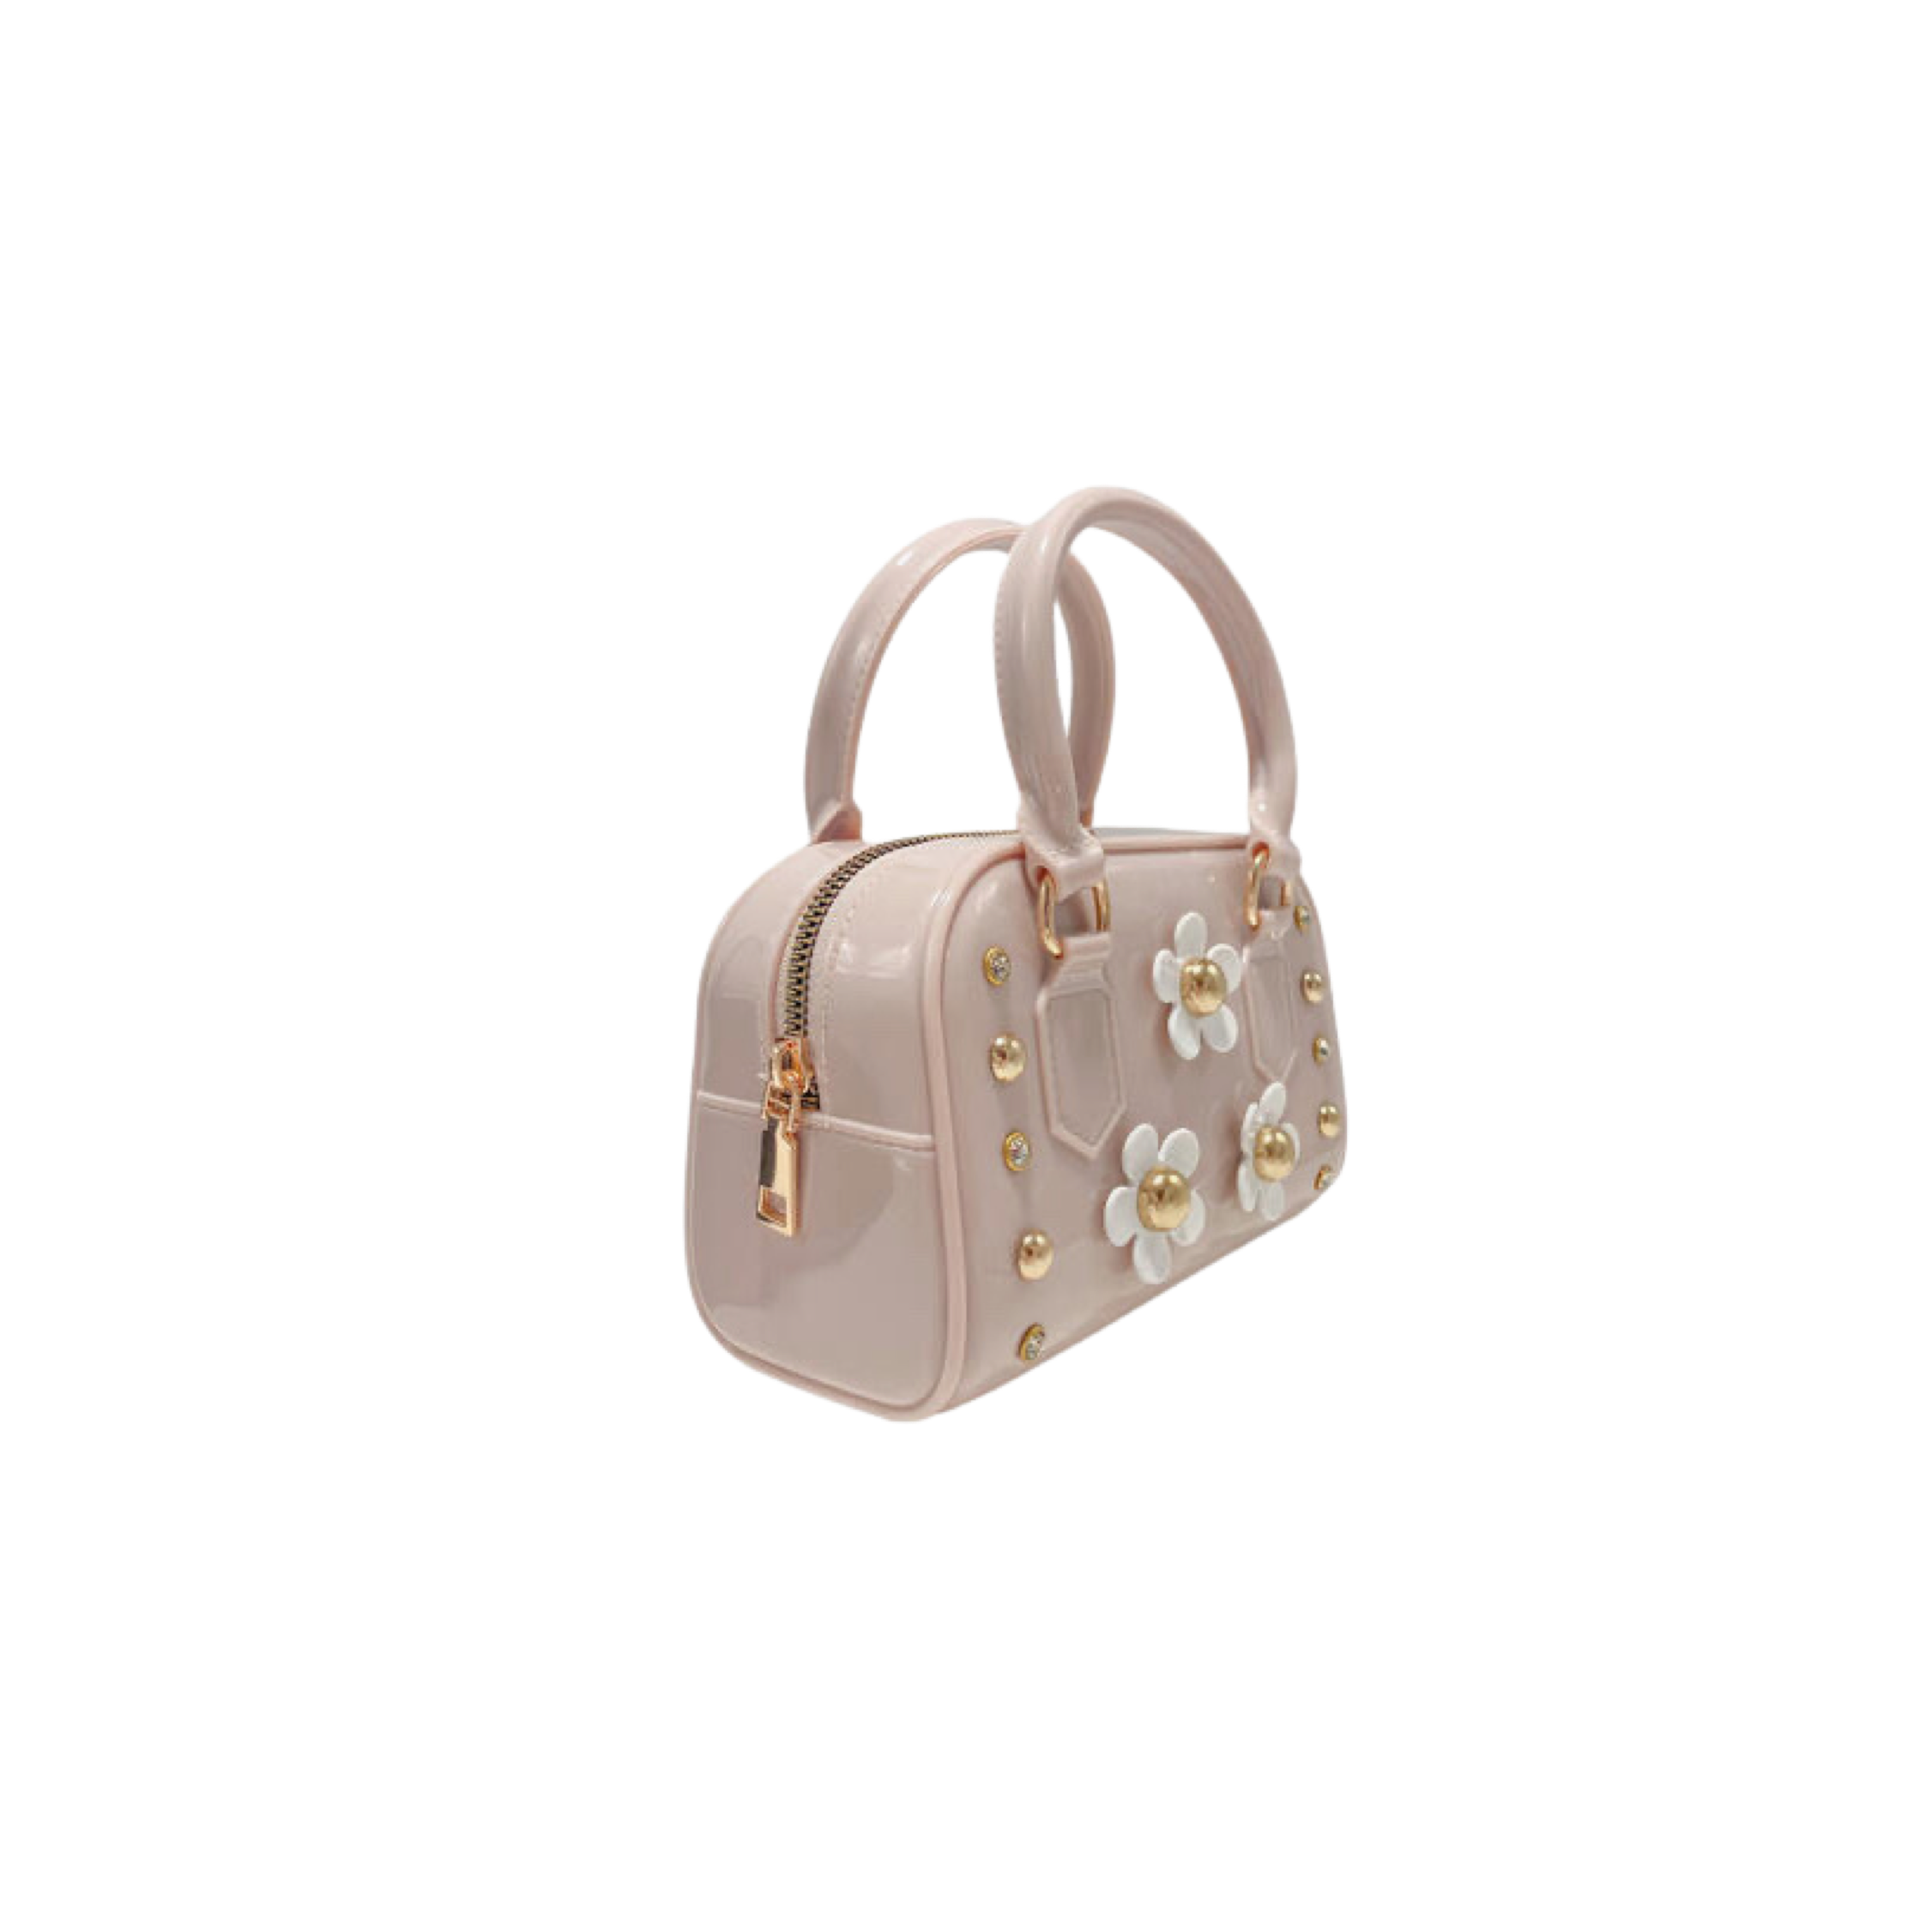 Floral Jelly Barrel Purse in Ivory and Apricot - Tadpoles and Tiddlers